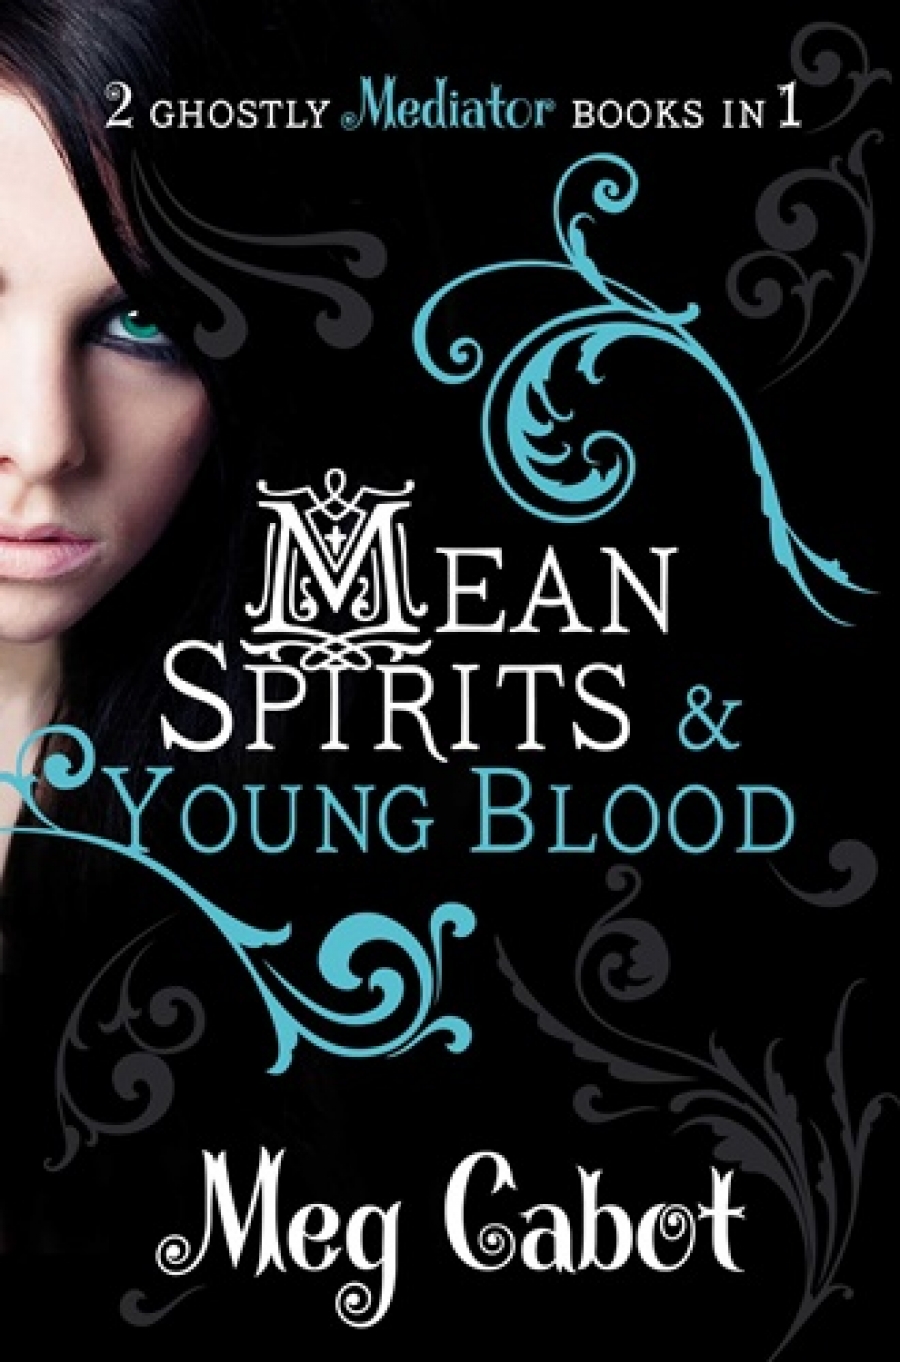 Meg C. Mediator 3 and 4: Mean Spirits / Young Blood 